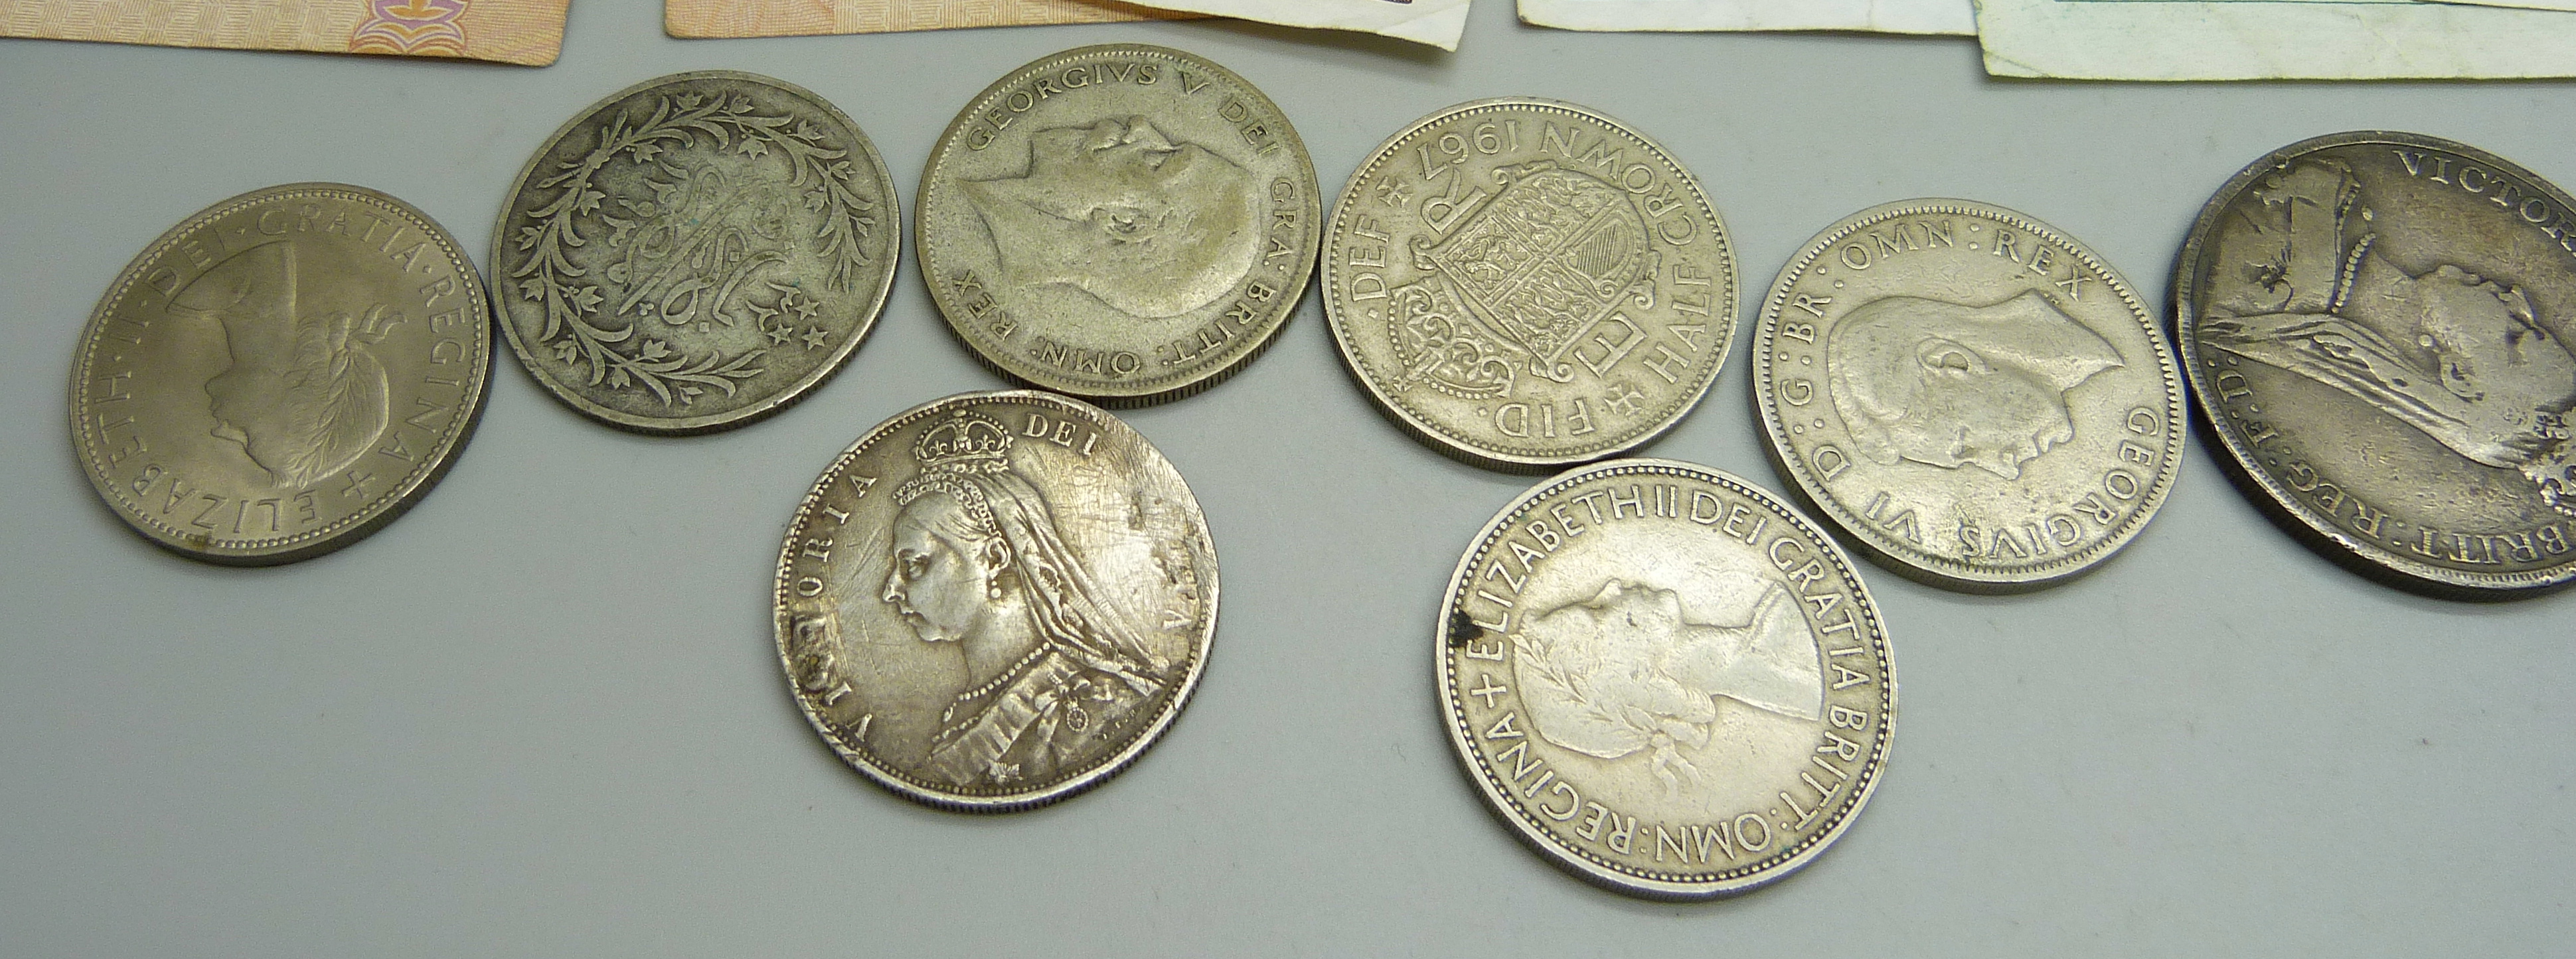 A collection of foreign bank notes, British and foreign coins including an 1889 crown and 1887 - Image 4 of 5